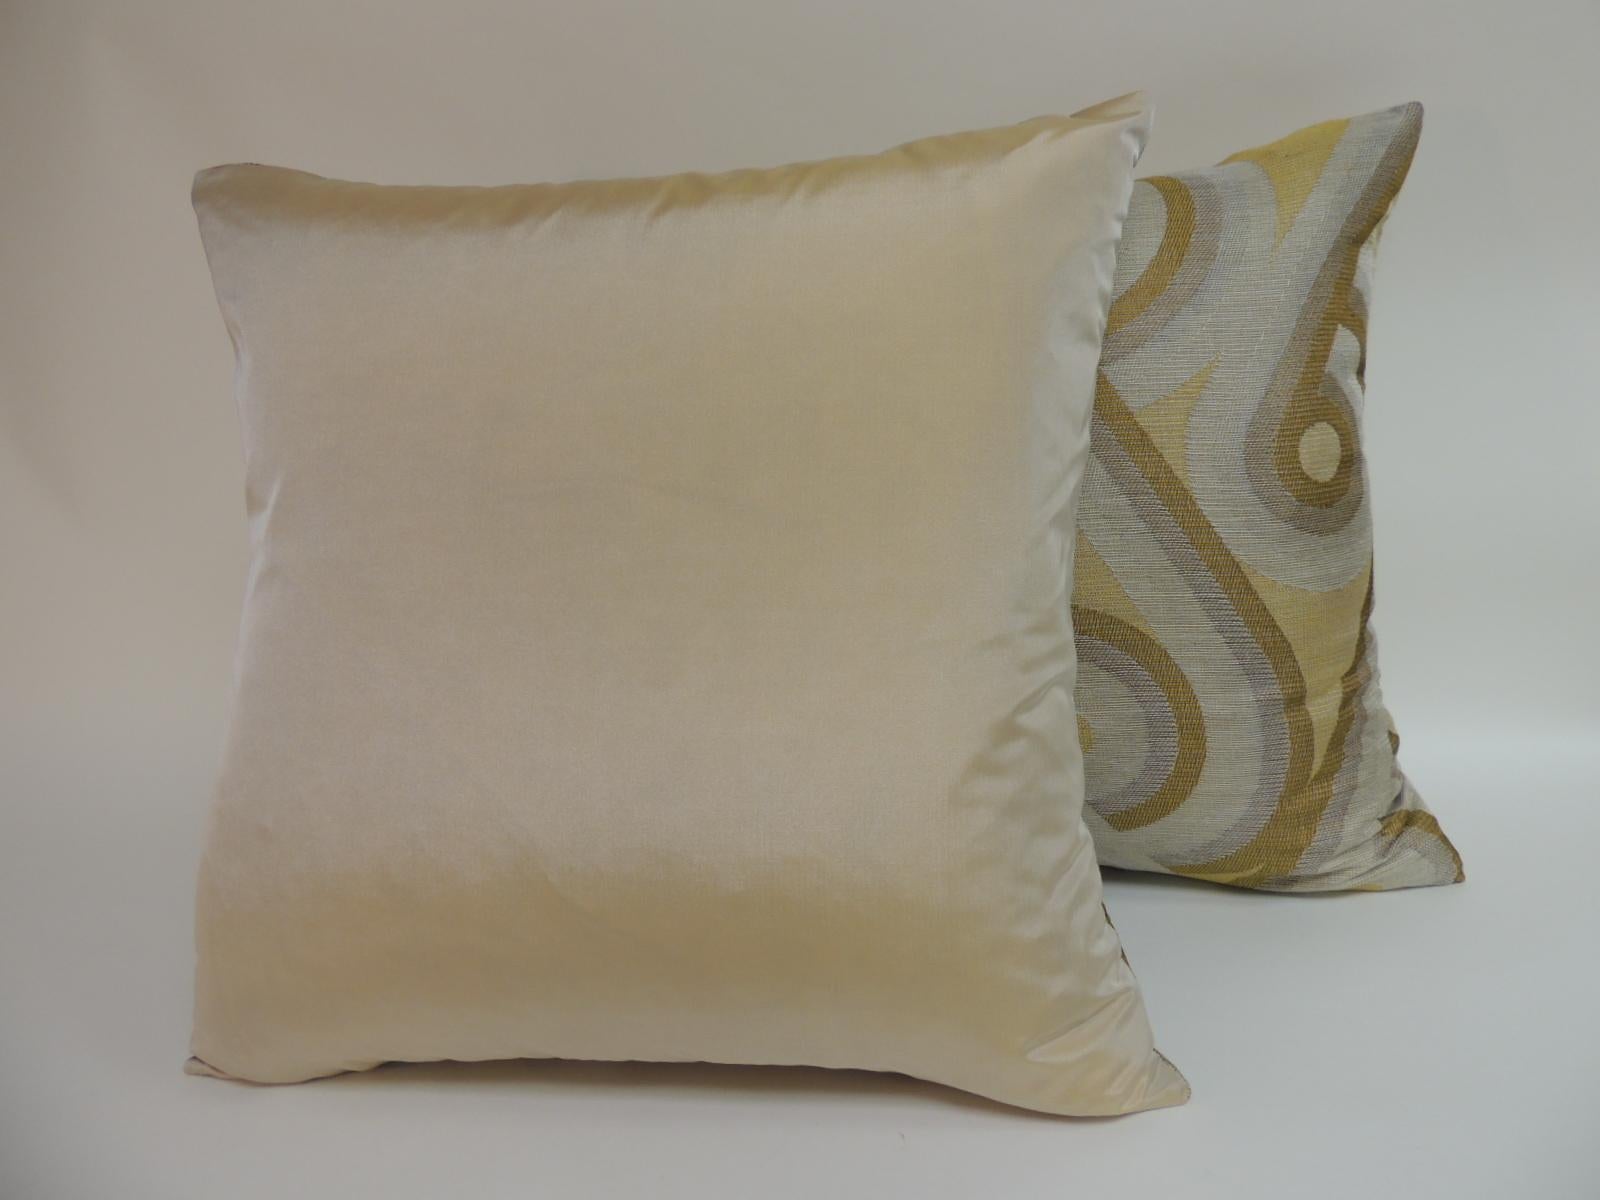 Hand-Crafted Pair of Mid-Century Modern Gold and Yellow Decorative Pillows